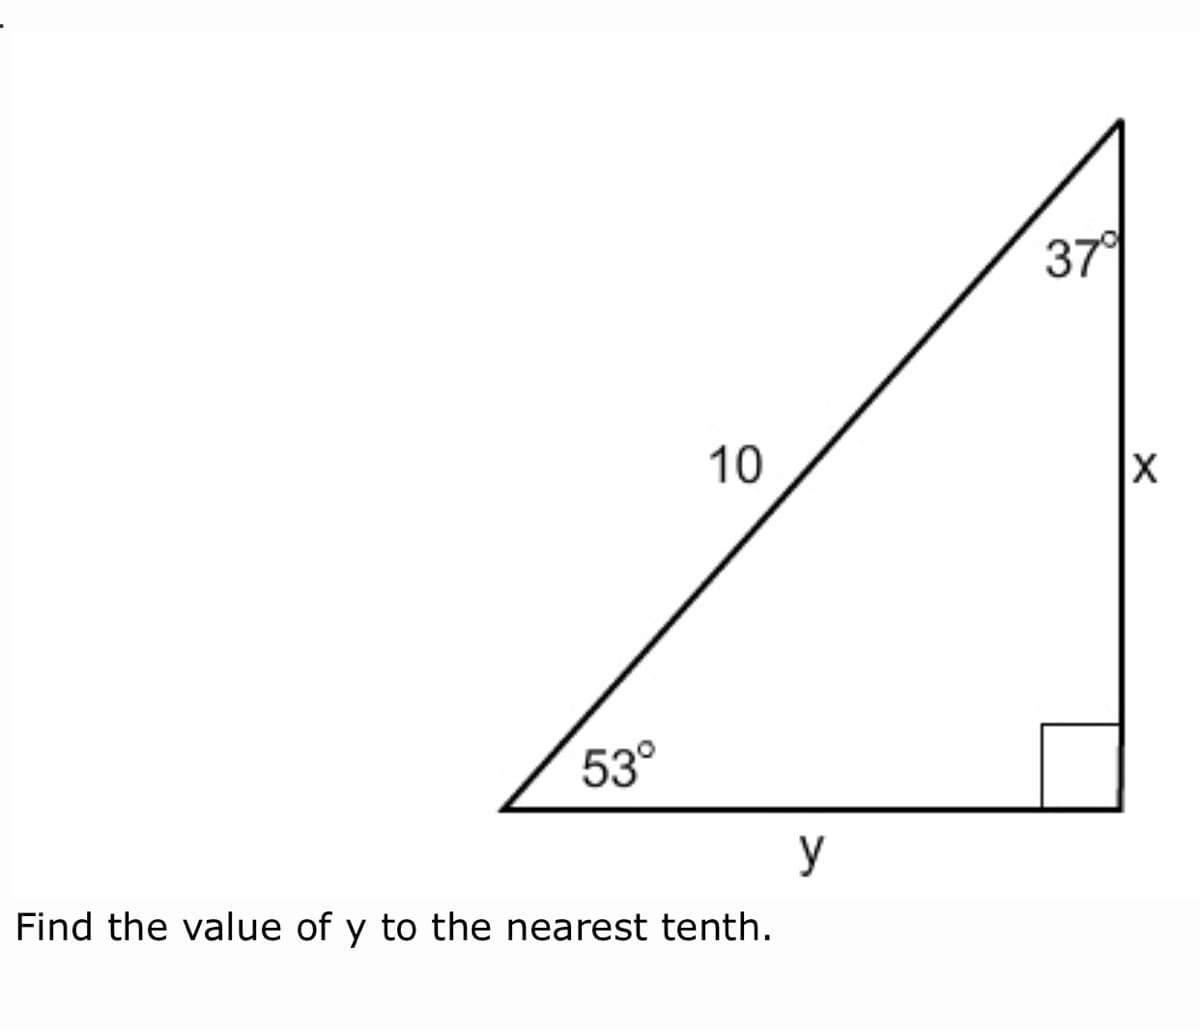 37
10
53°
y
Find the value of y to the nearest tenth.
